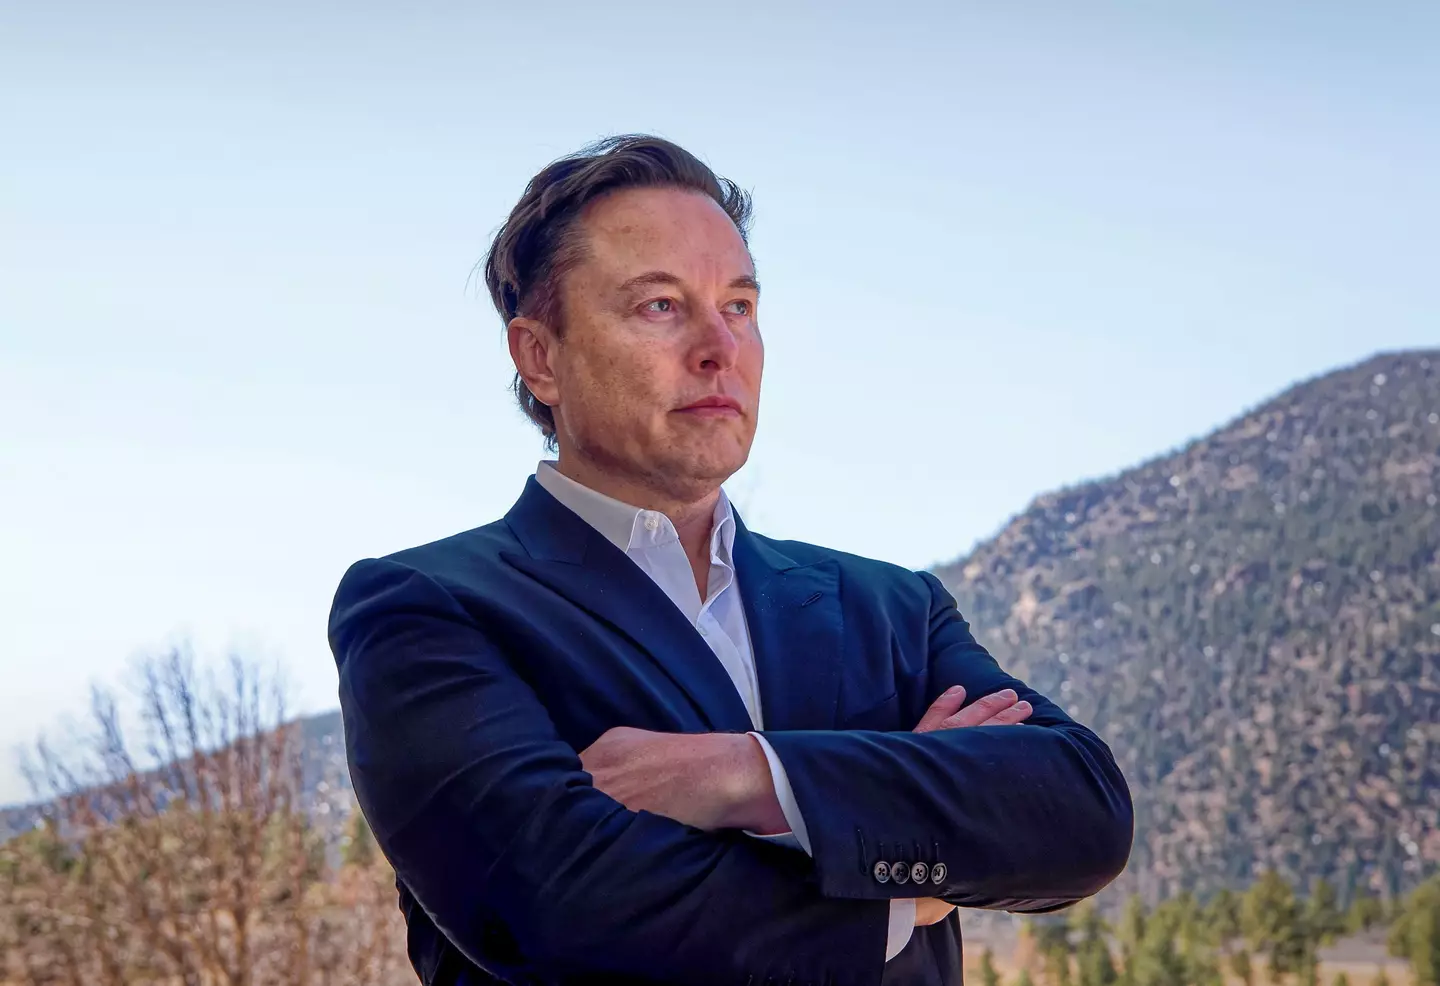 Musk is currently in a legal battle with Twitter.